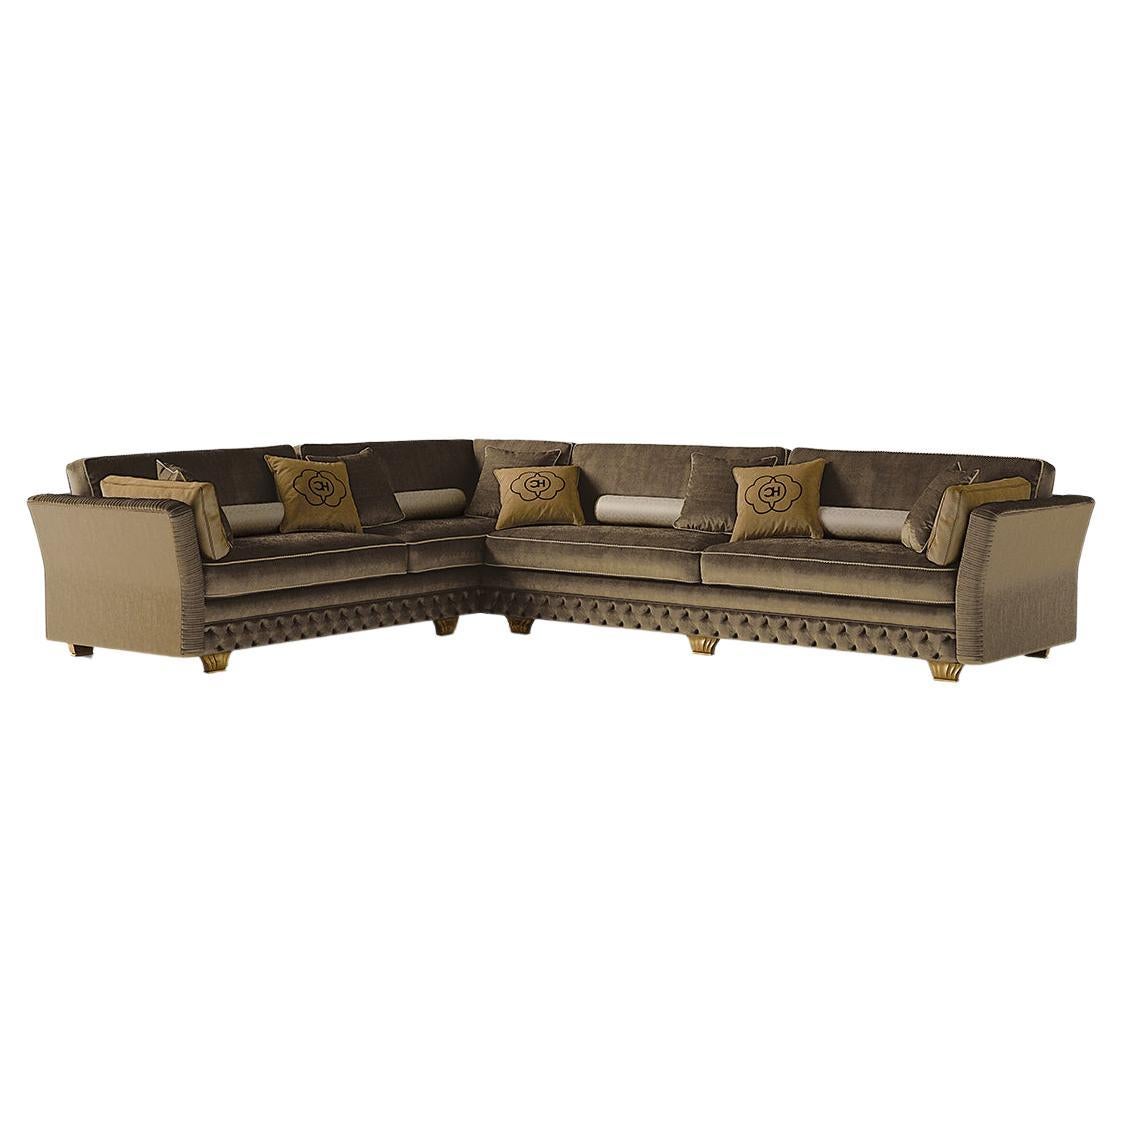 21st Century Carpanese Home Italia Sofa with Wooden Legs Neoclassic, 6443 For Sale